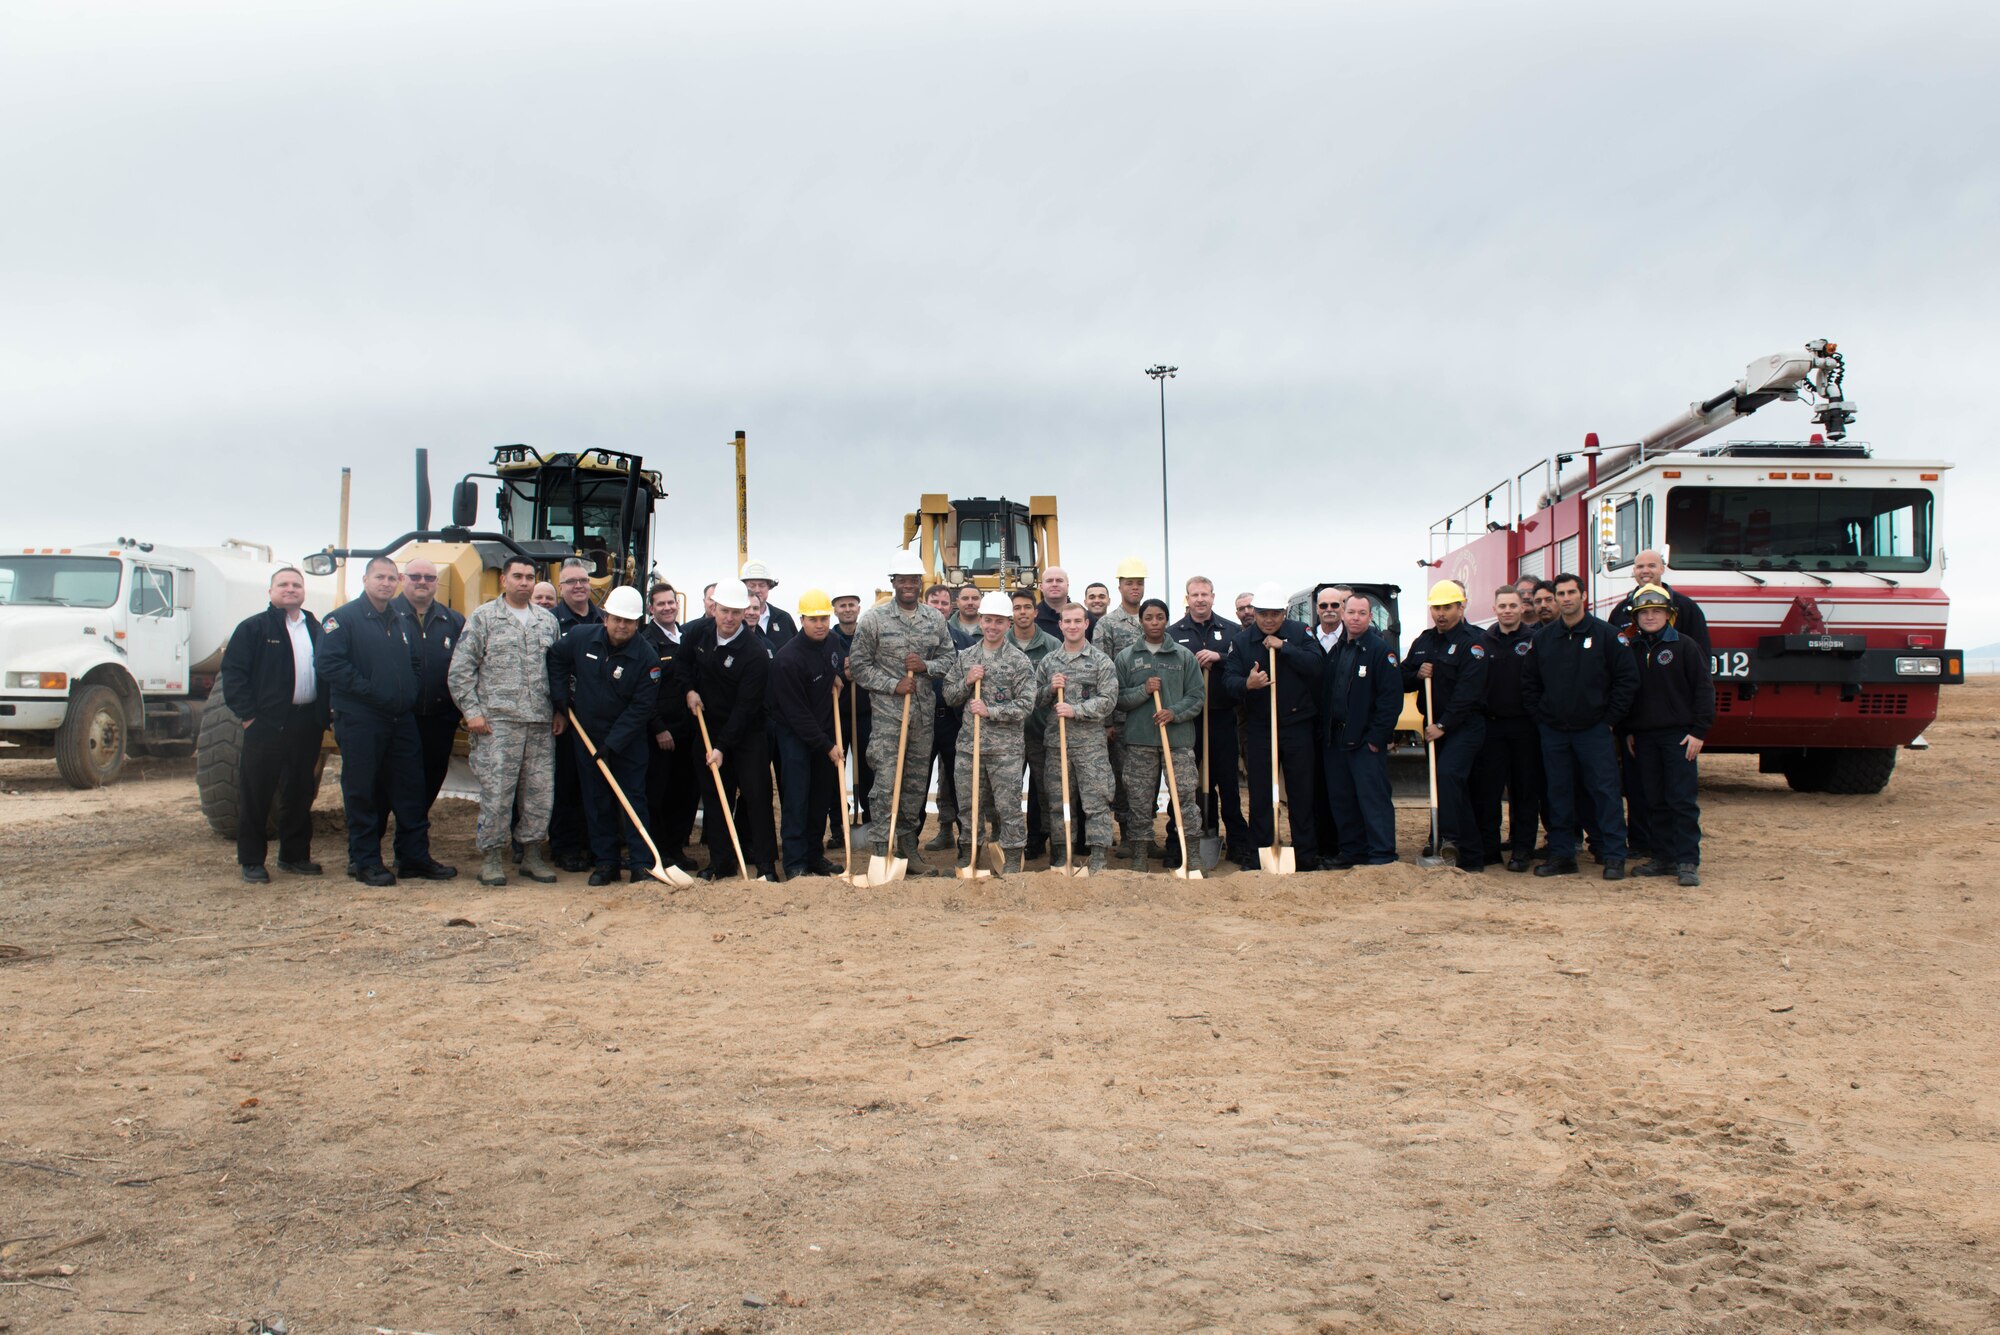 Members of the 812th Civil Engineer Squadron and its firefighters, pose for a ceremonial ground breaking photo Dec. 14, 2018, where a new fire station will be constructed on the flightline. (U.S. Air Force photo by Joe Jones)